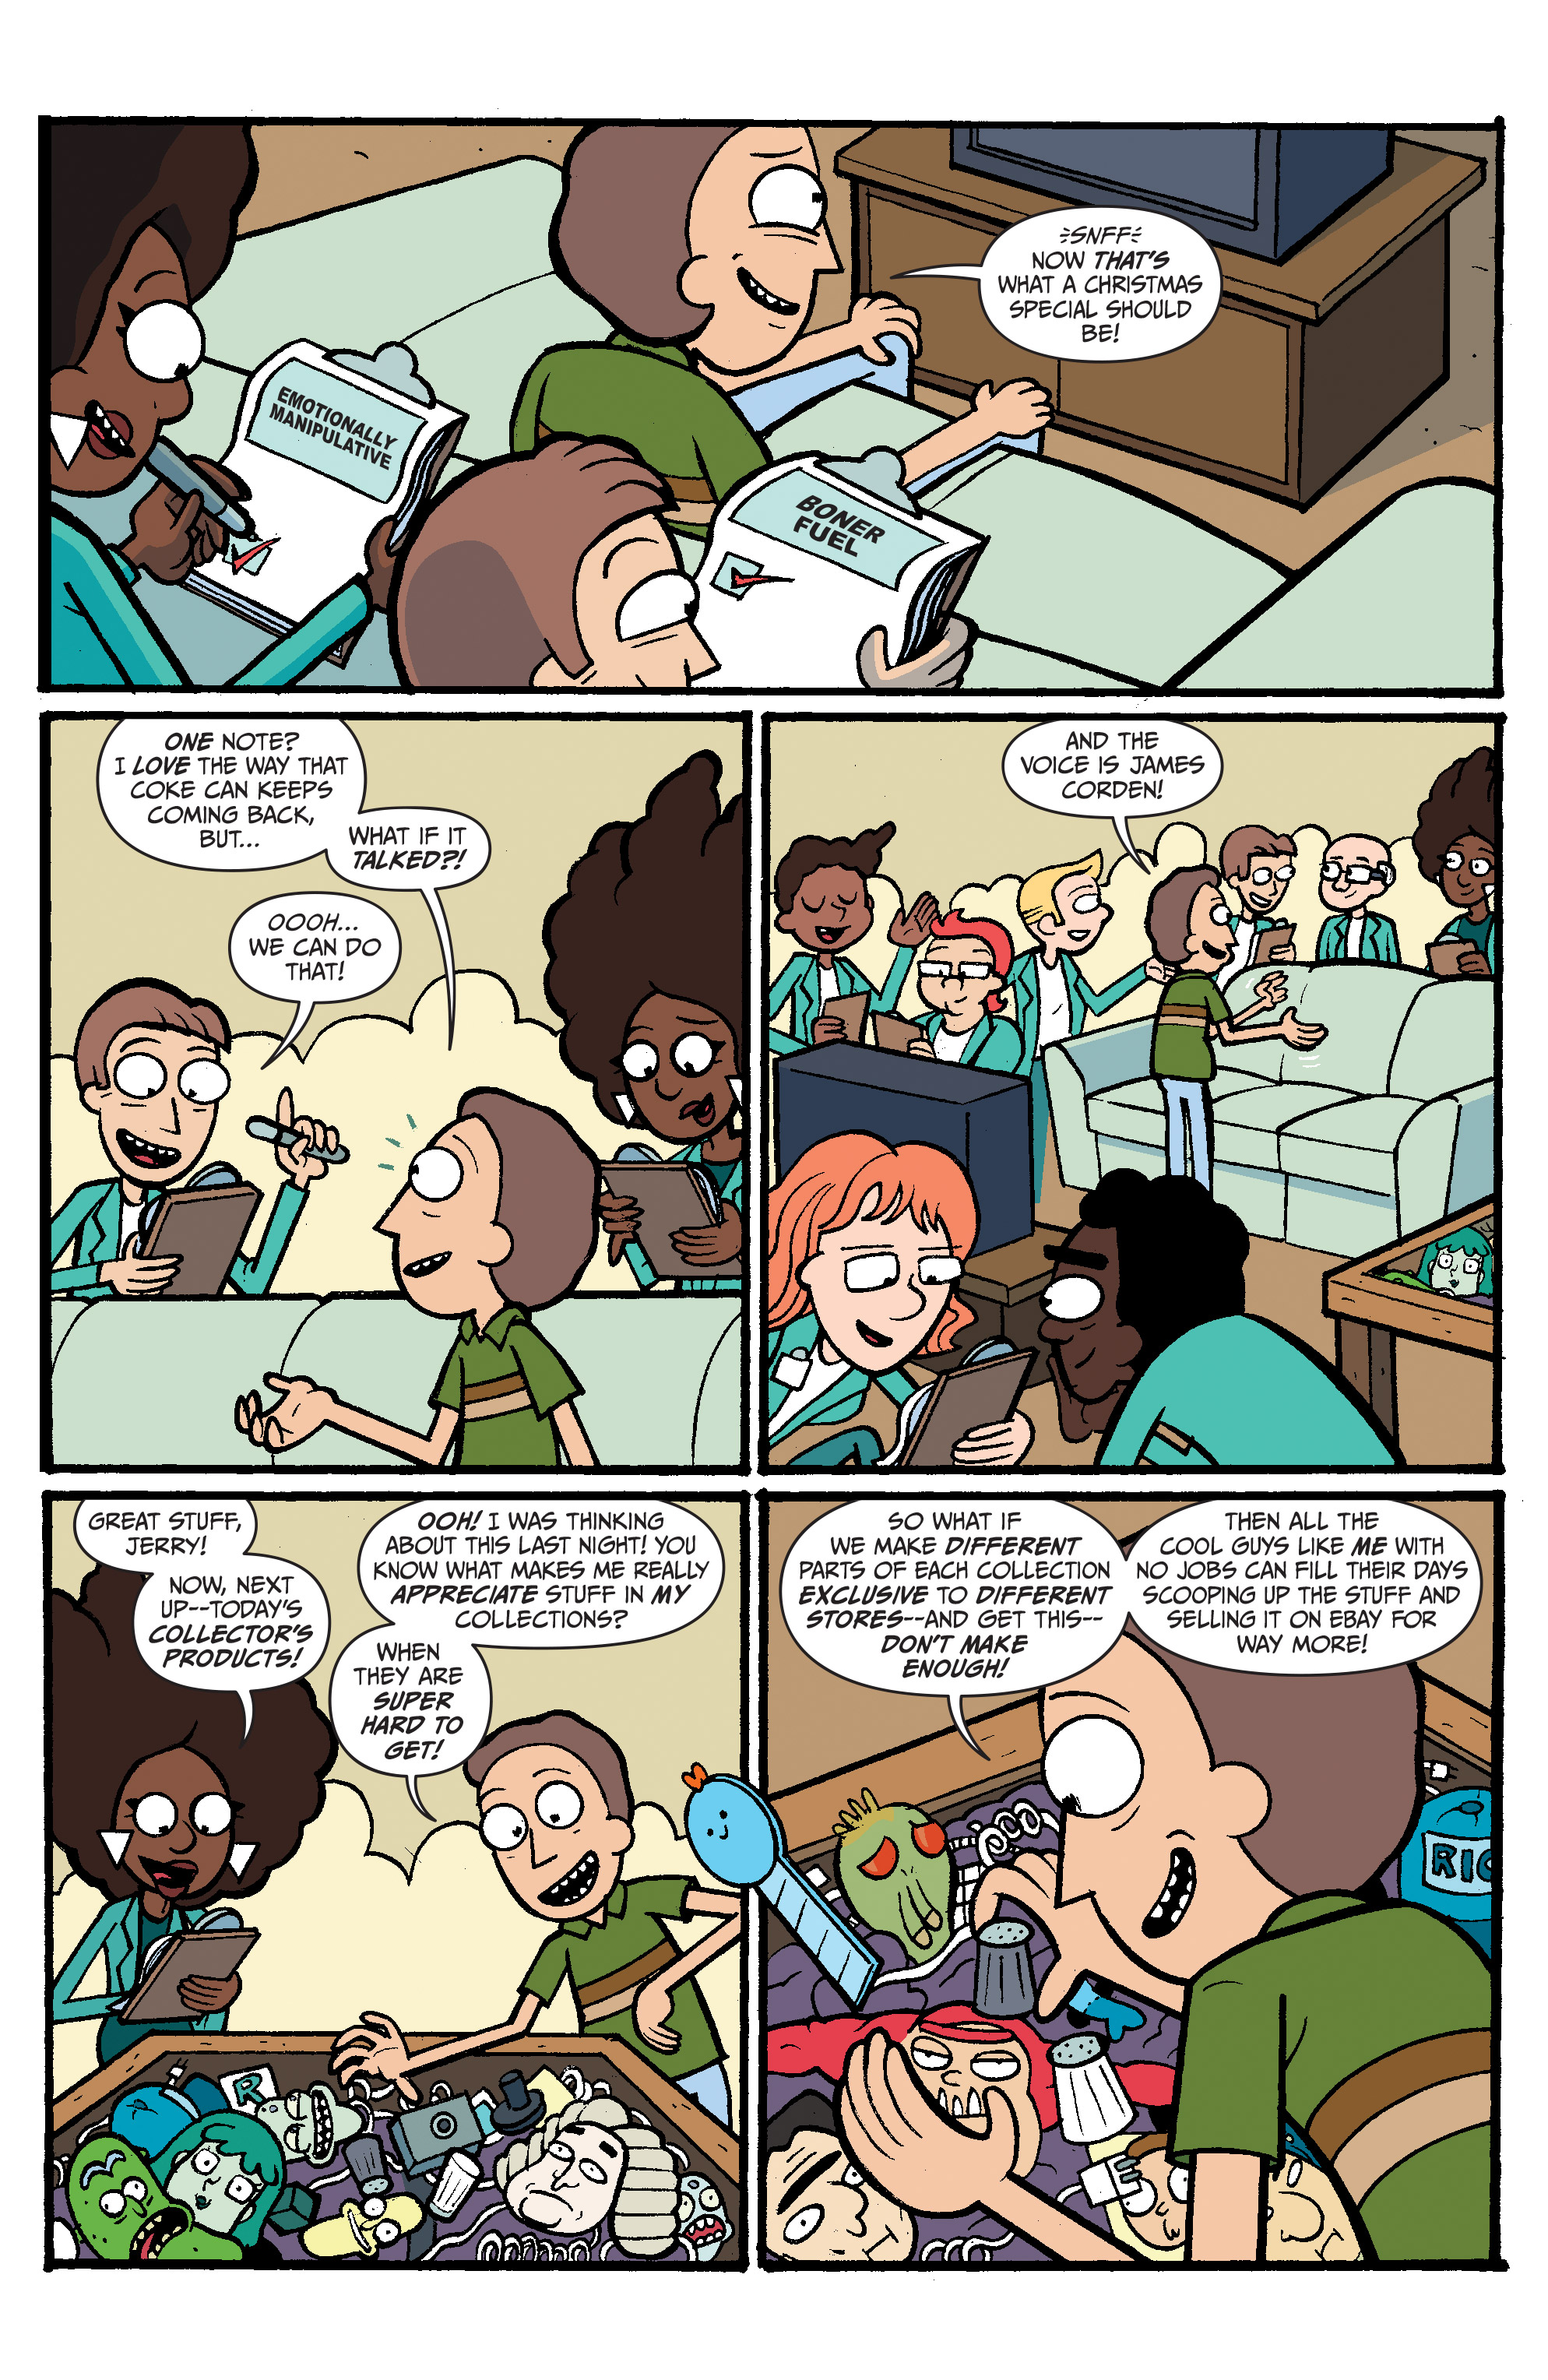 Rick and Morty: Corporate Assets (2021-): Chapter 4 - Page 5